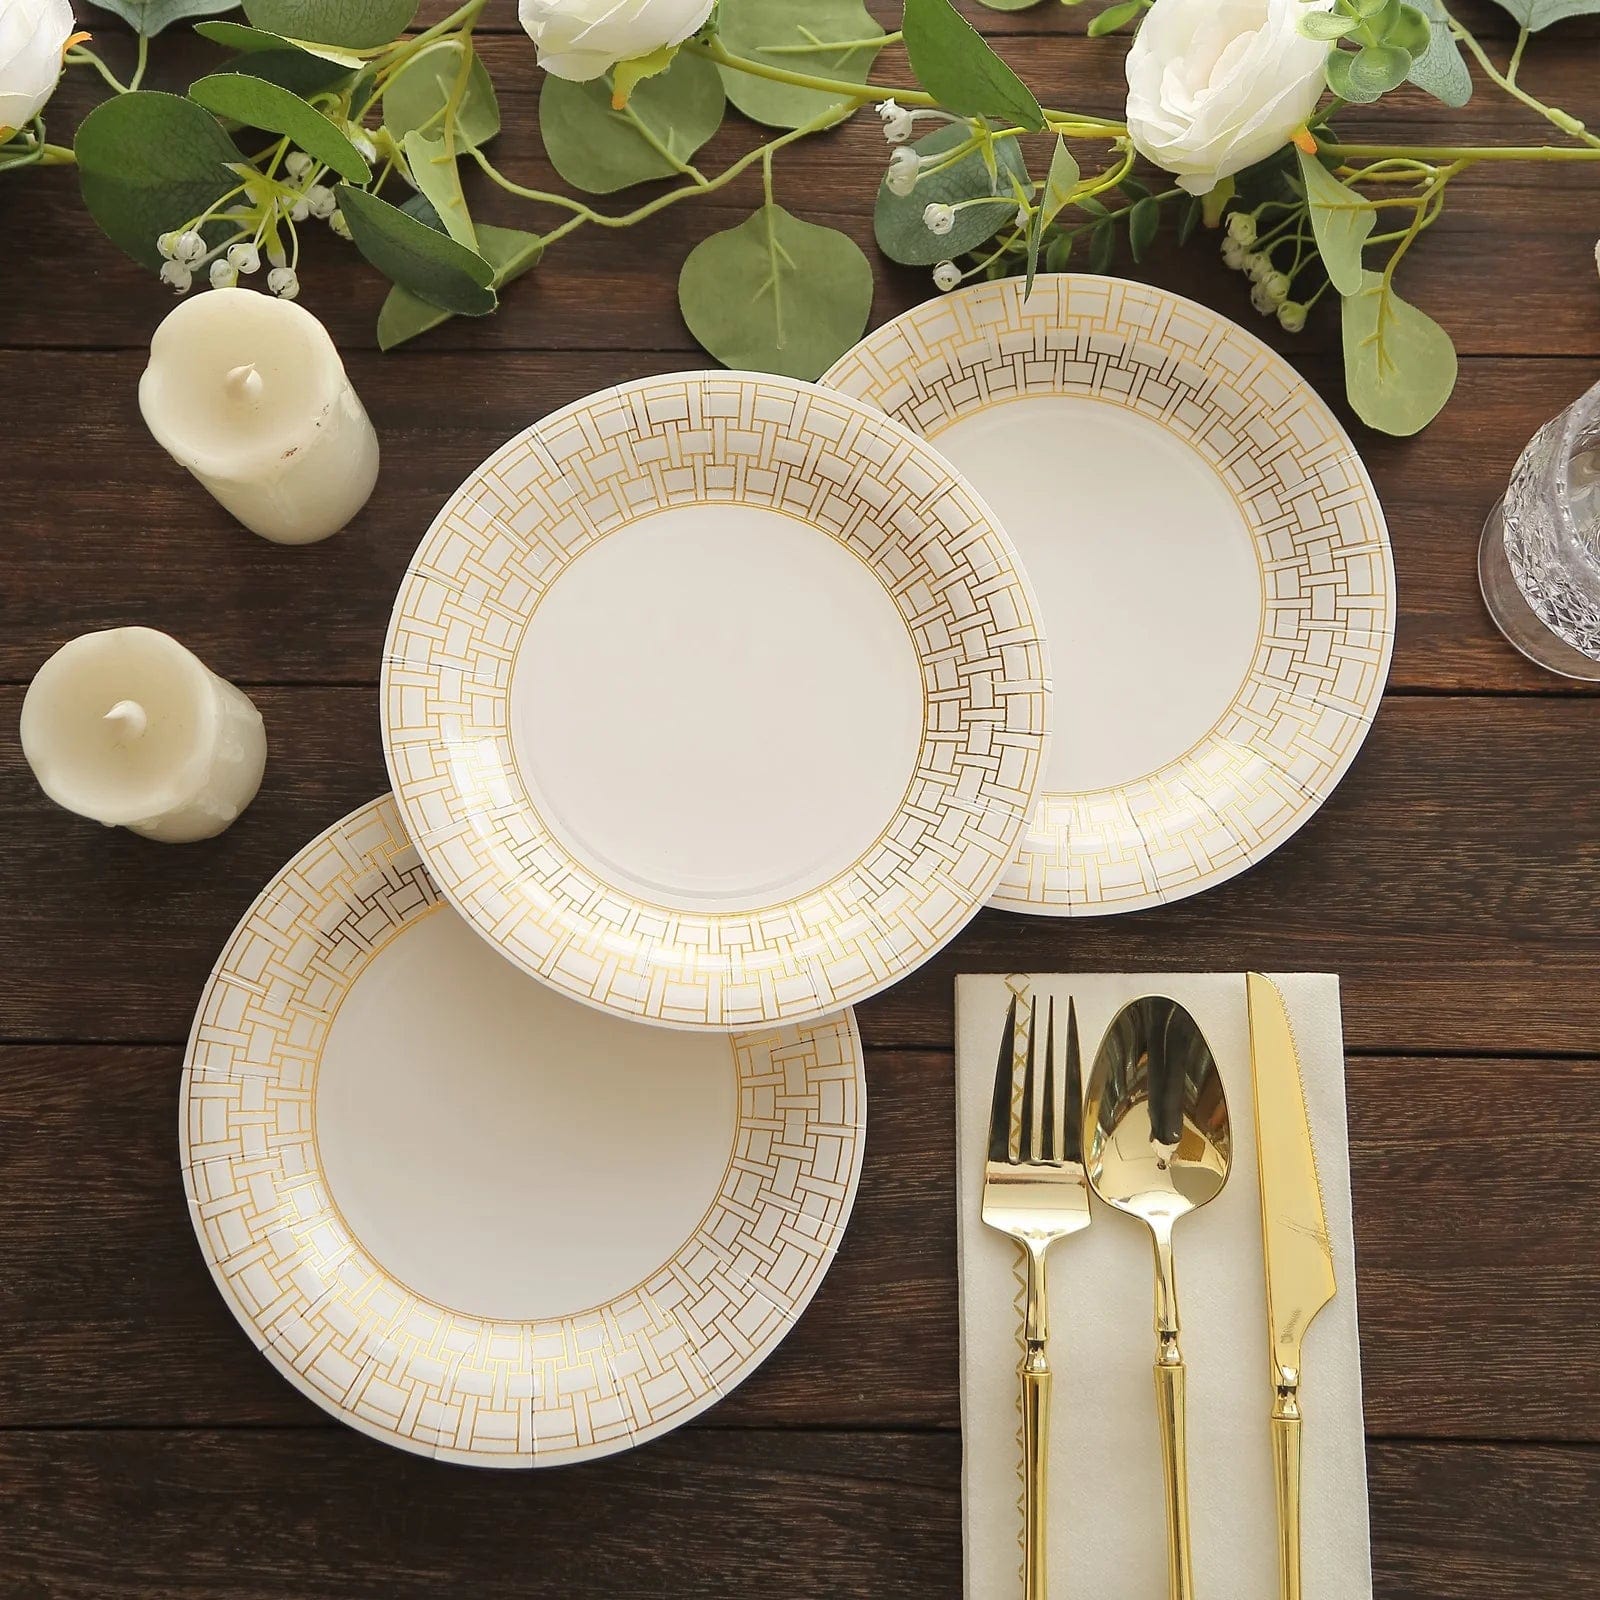 25 White Round Disposable Paper Plates with Gold Basketweave Design Rim